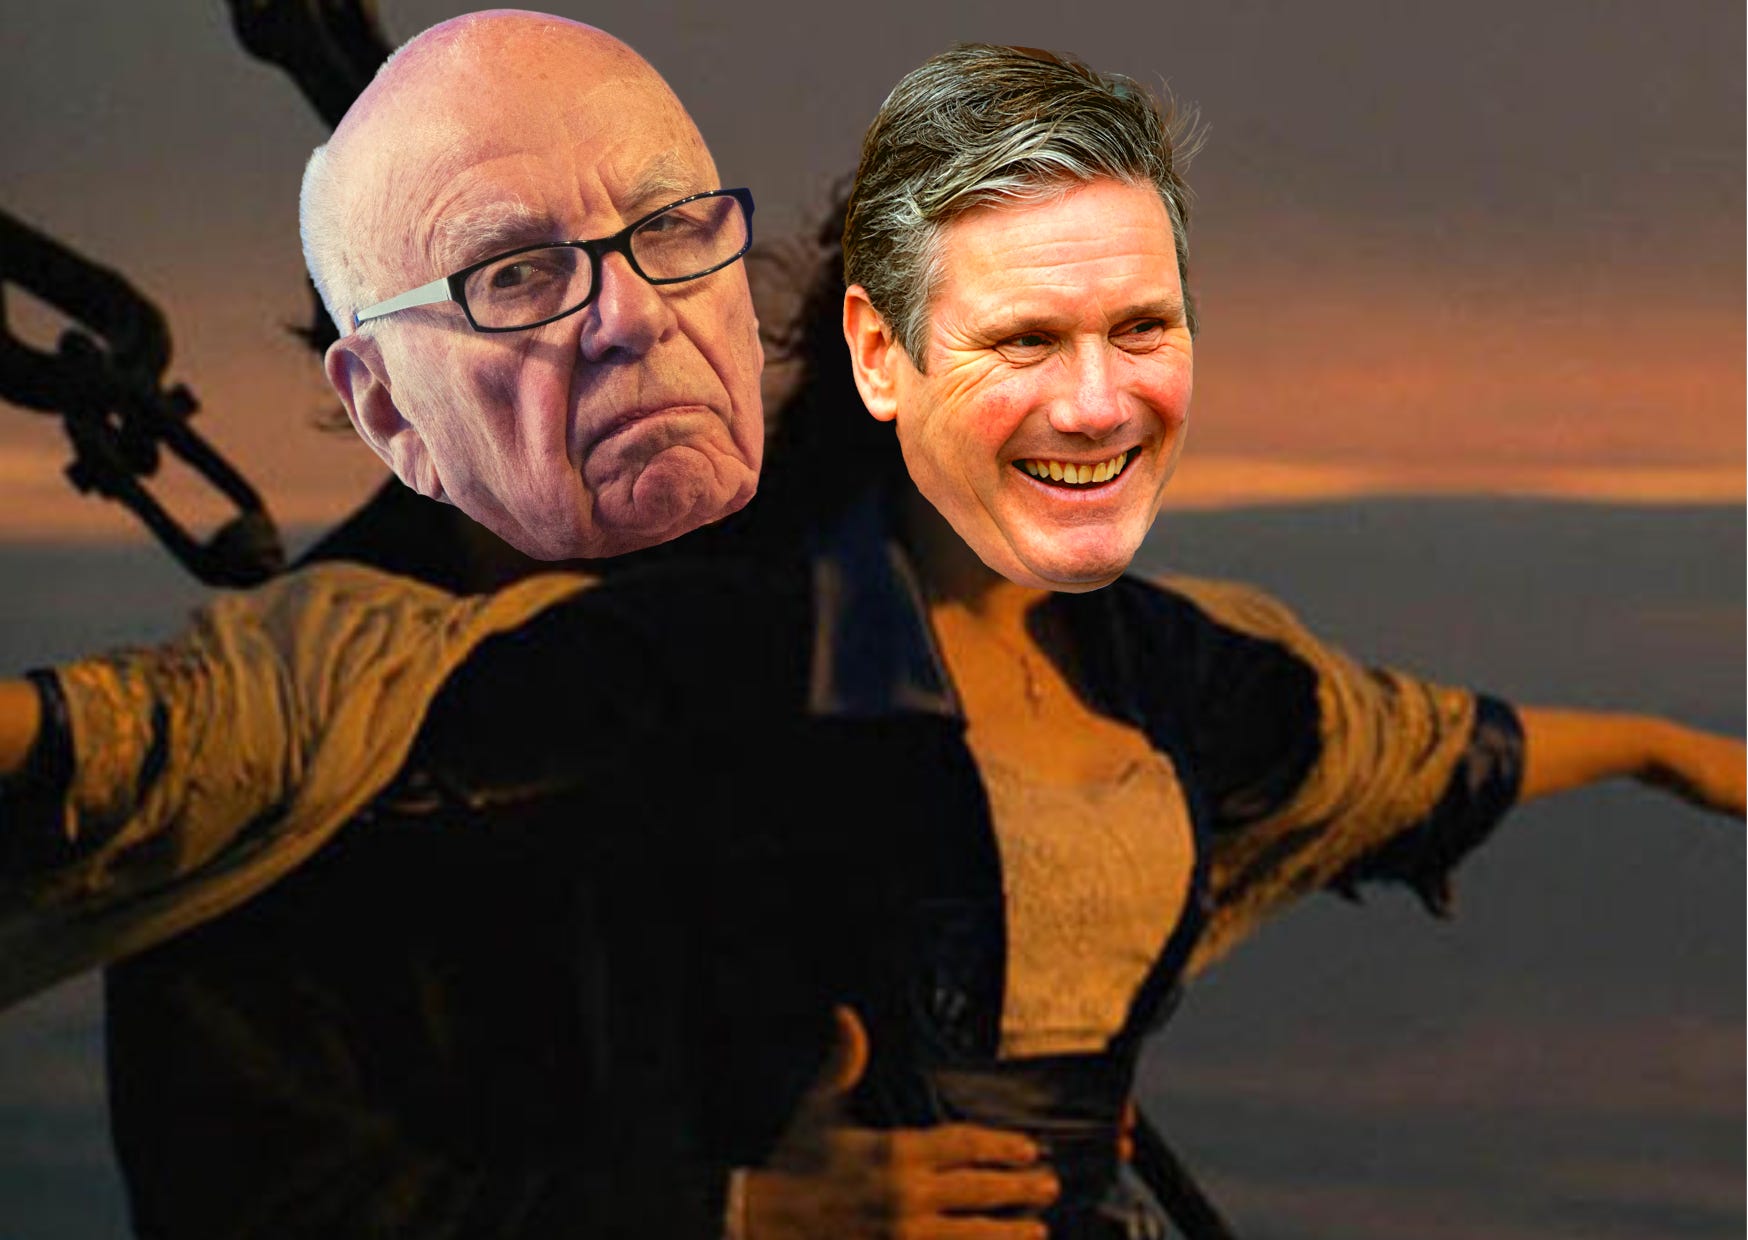 The “I’m flying, Jack” scene trom Titanic but Jack is Rupert Murdoch and Rose is Keir Starmer